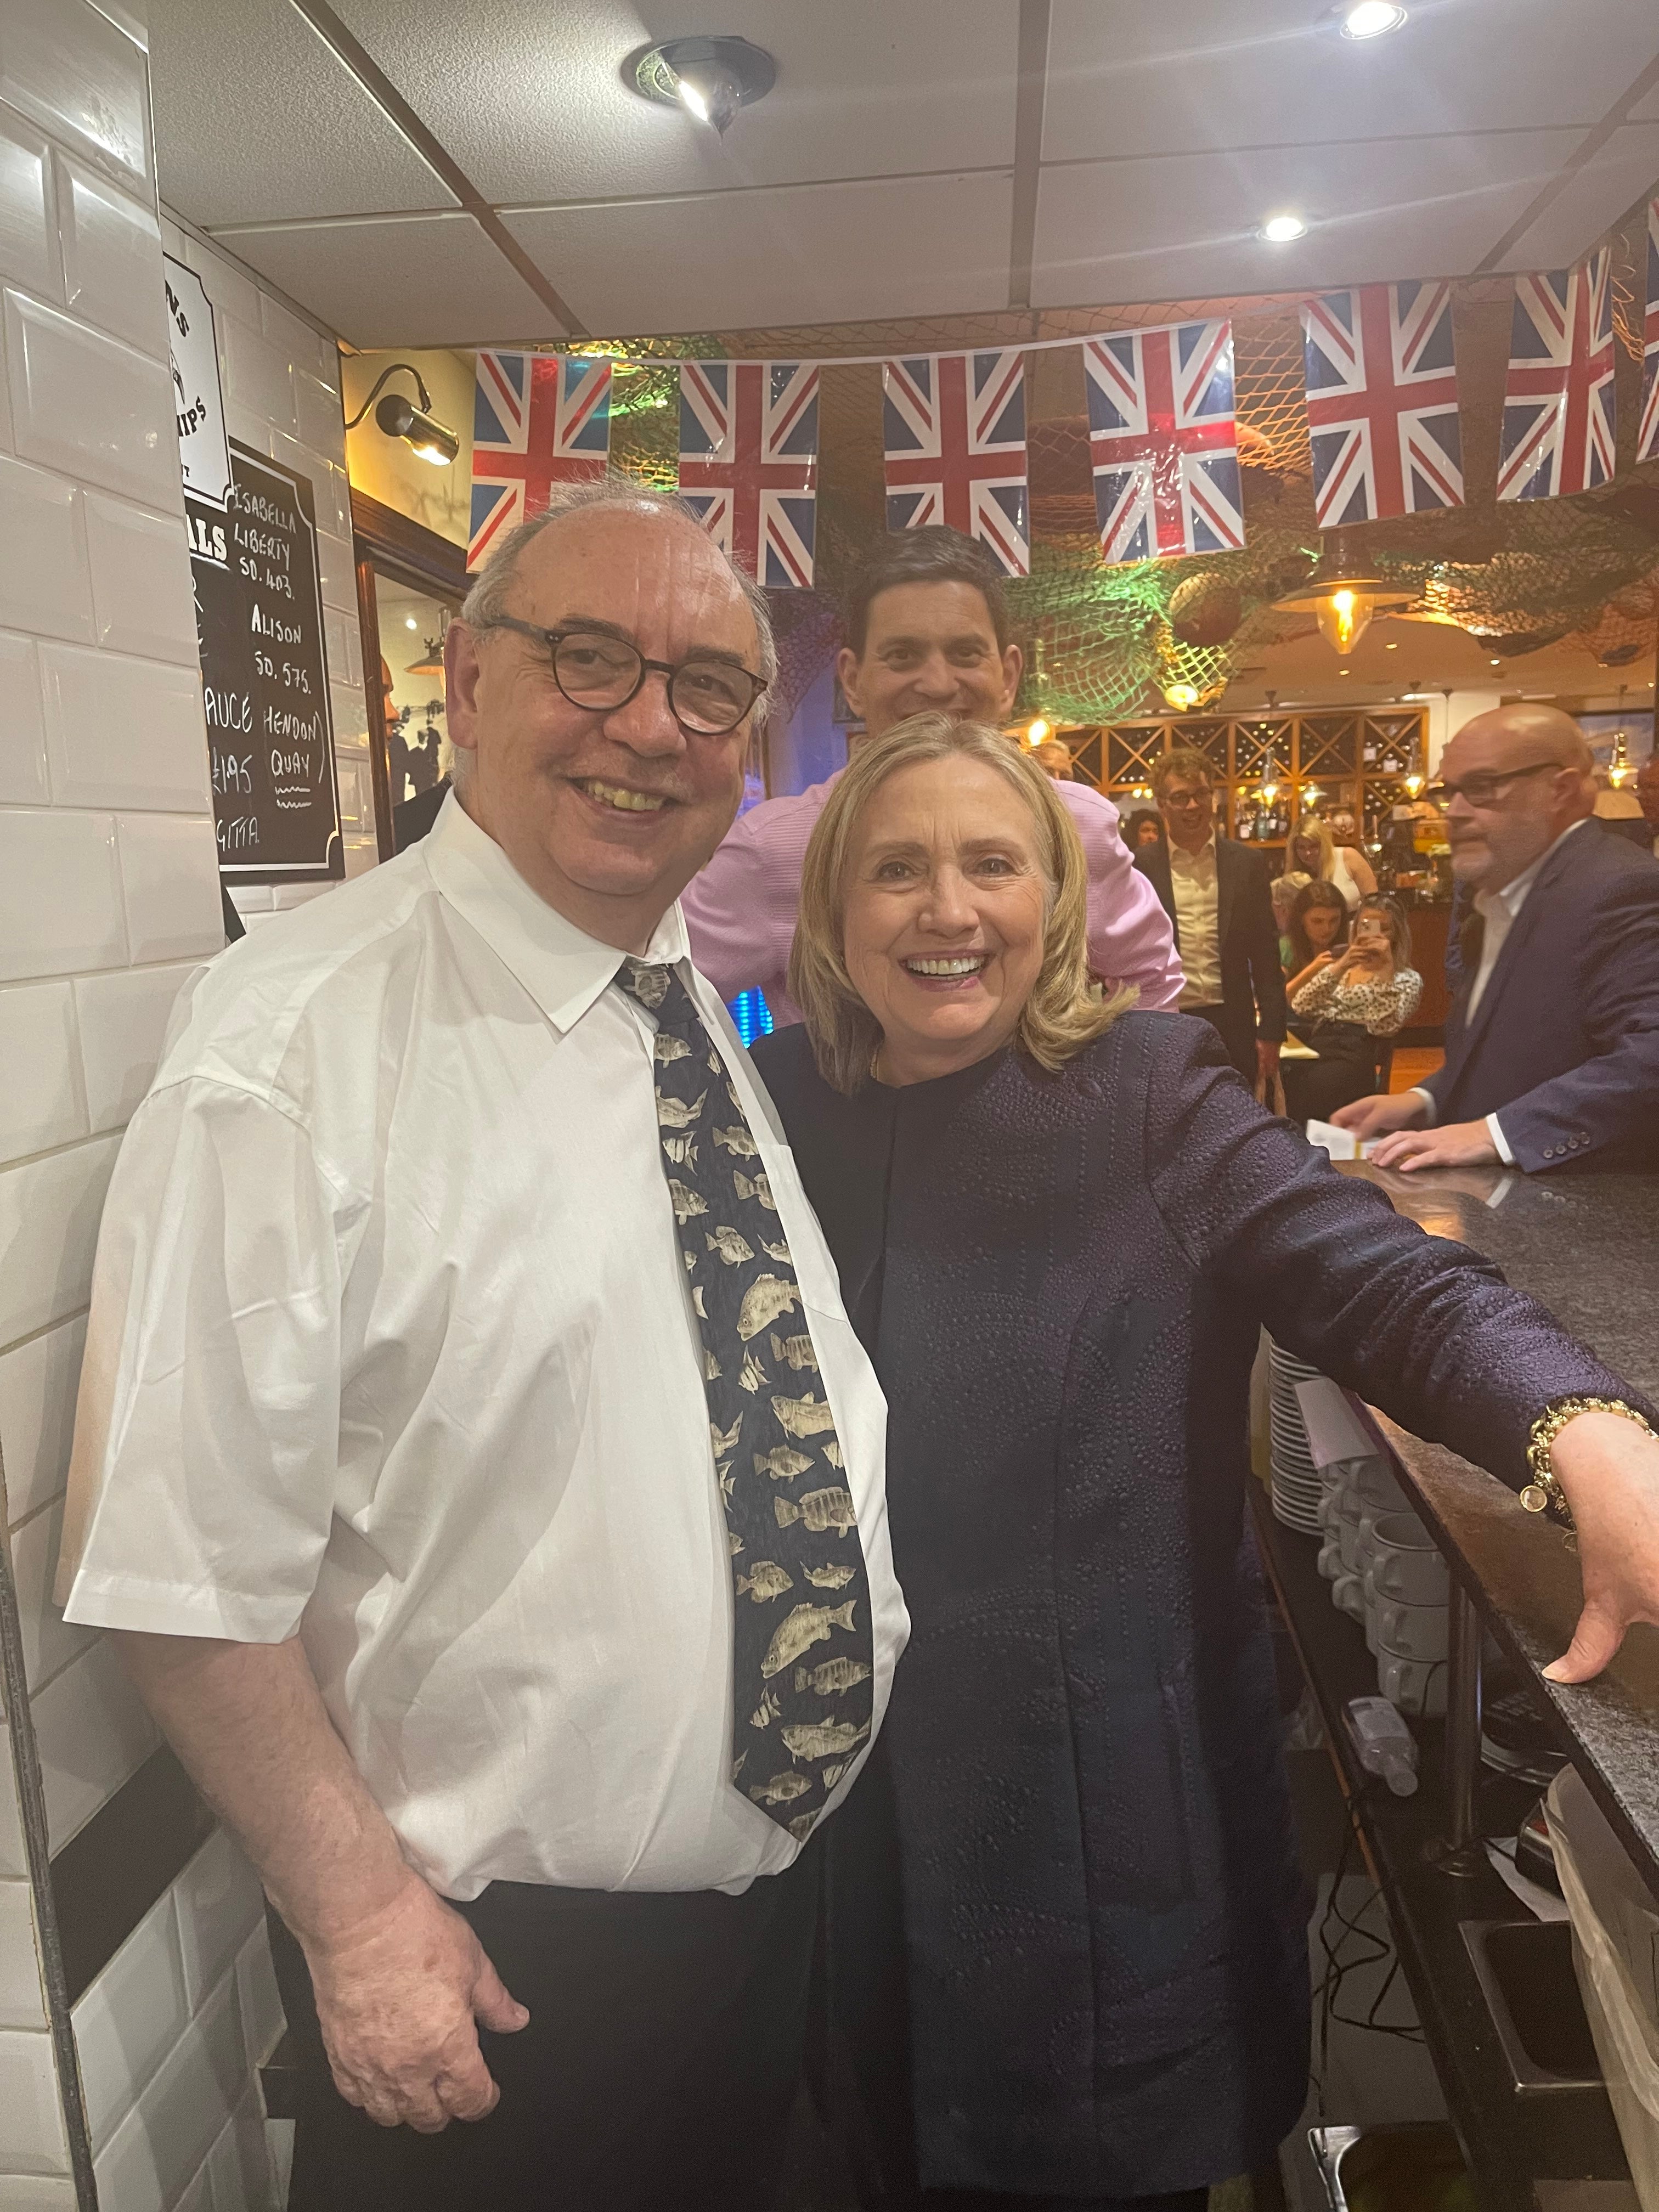 Hillary Clinton is greeted by Richard Ord senior, with former MP David Miliband behind, at Colman’s restaurant in South Shields (Richard Ord/PA)